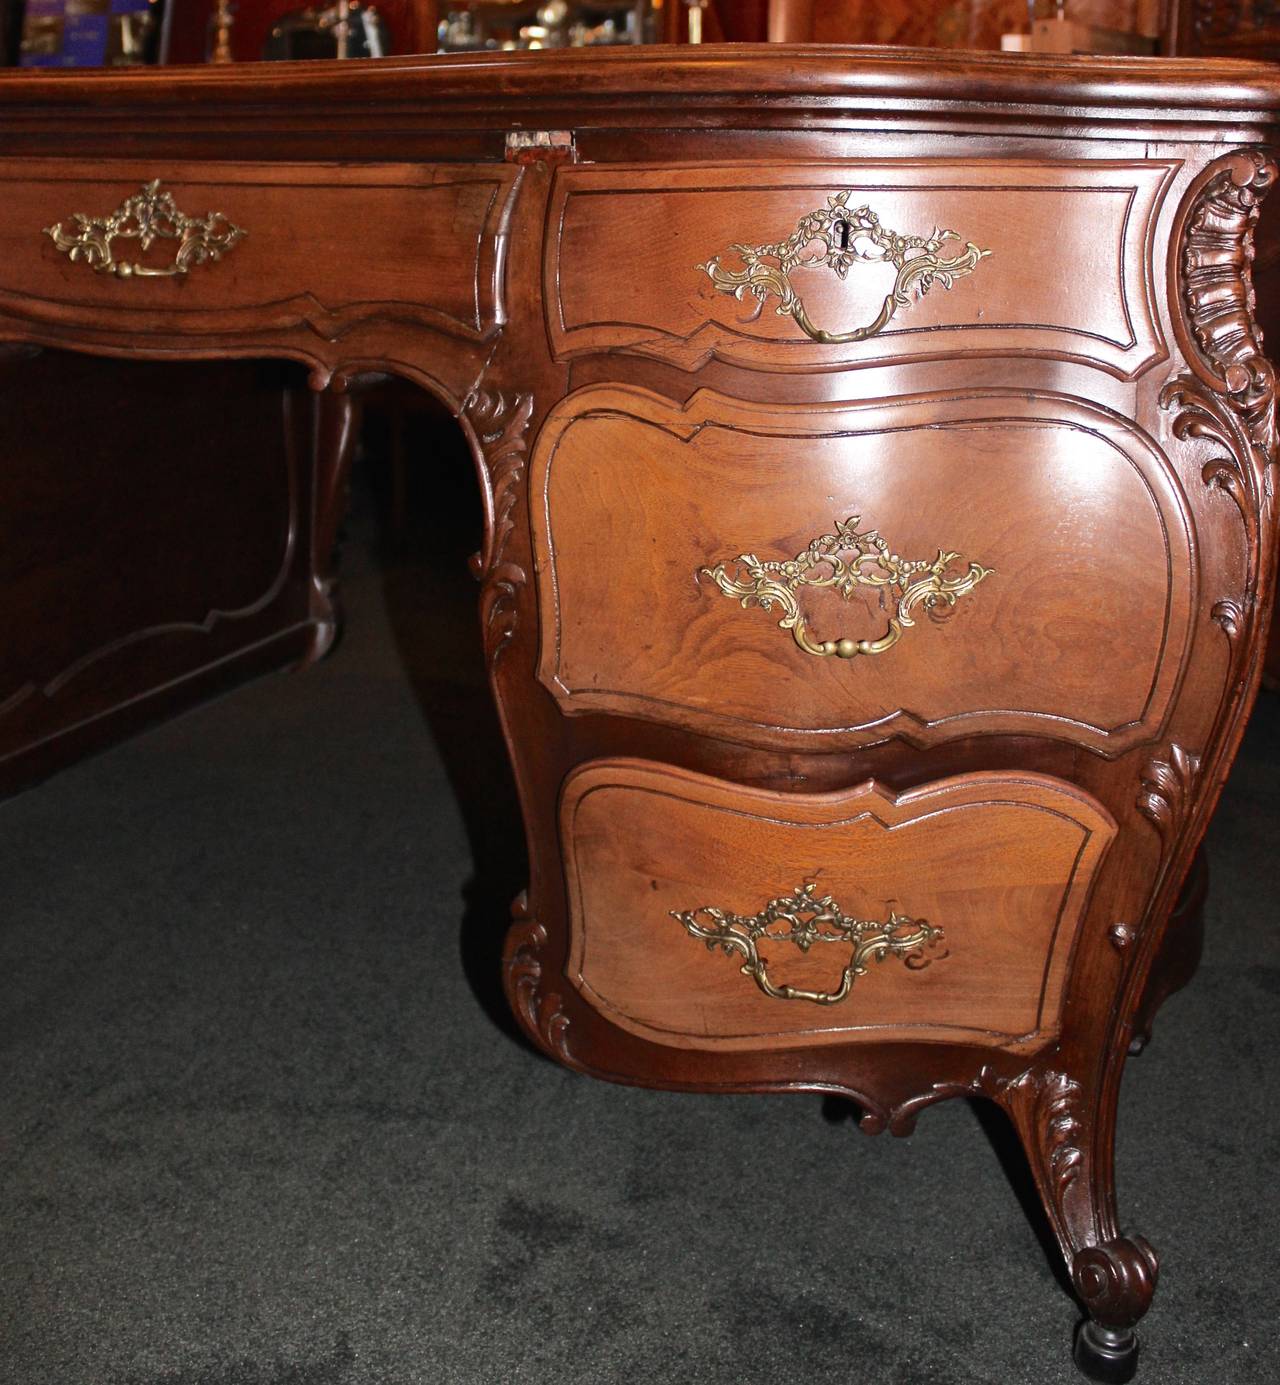 This French partners desk is made in the Louis XV style.  The desk has a bombay shape and features gorgeous, hand-carved details from walnut.  The desk is symmetrical on either side.  Both sides feature four pull out drawers and a large swing door.